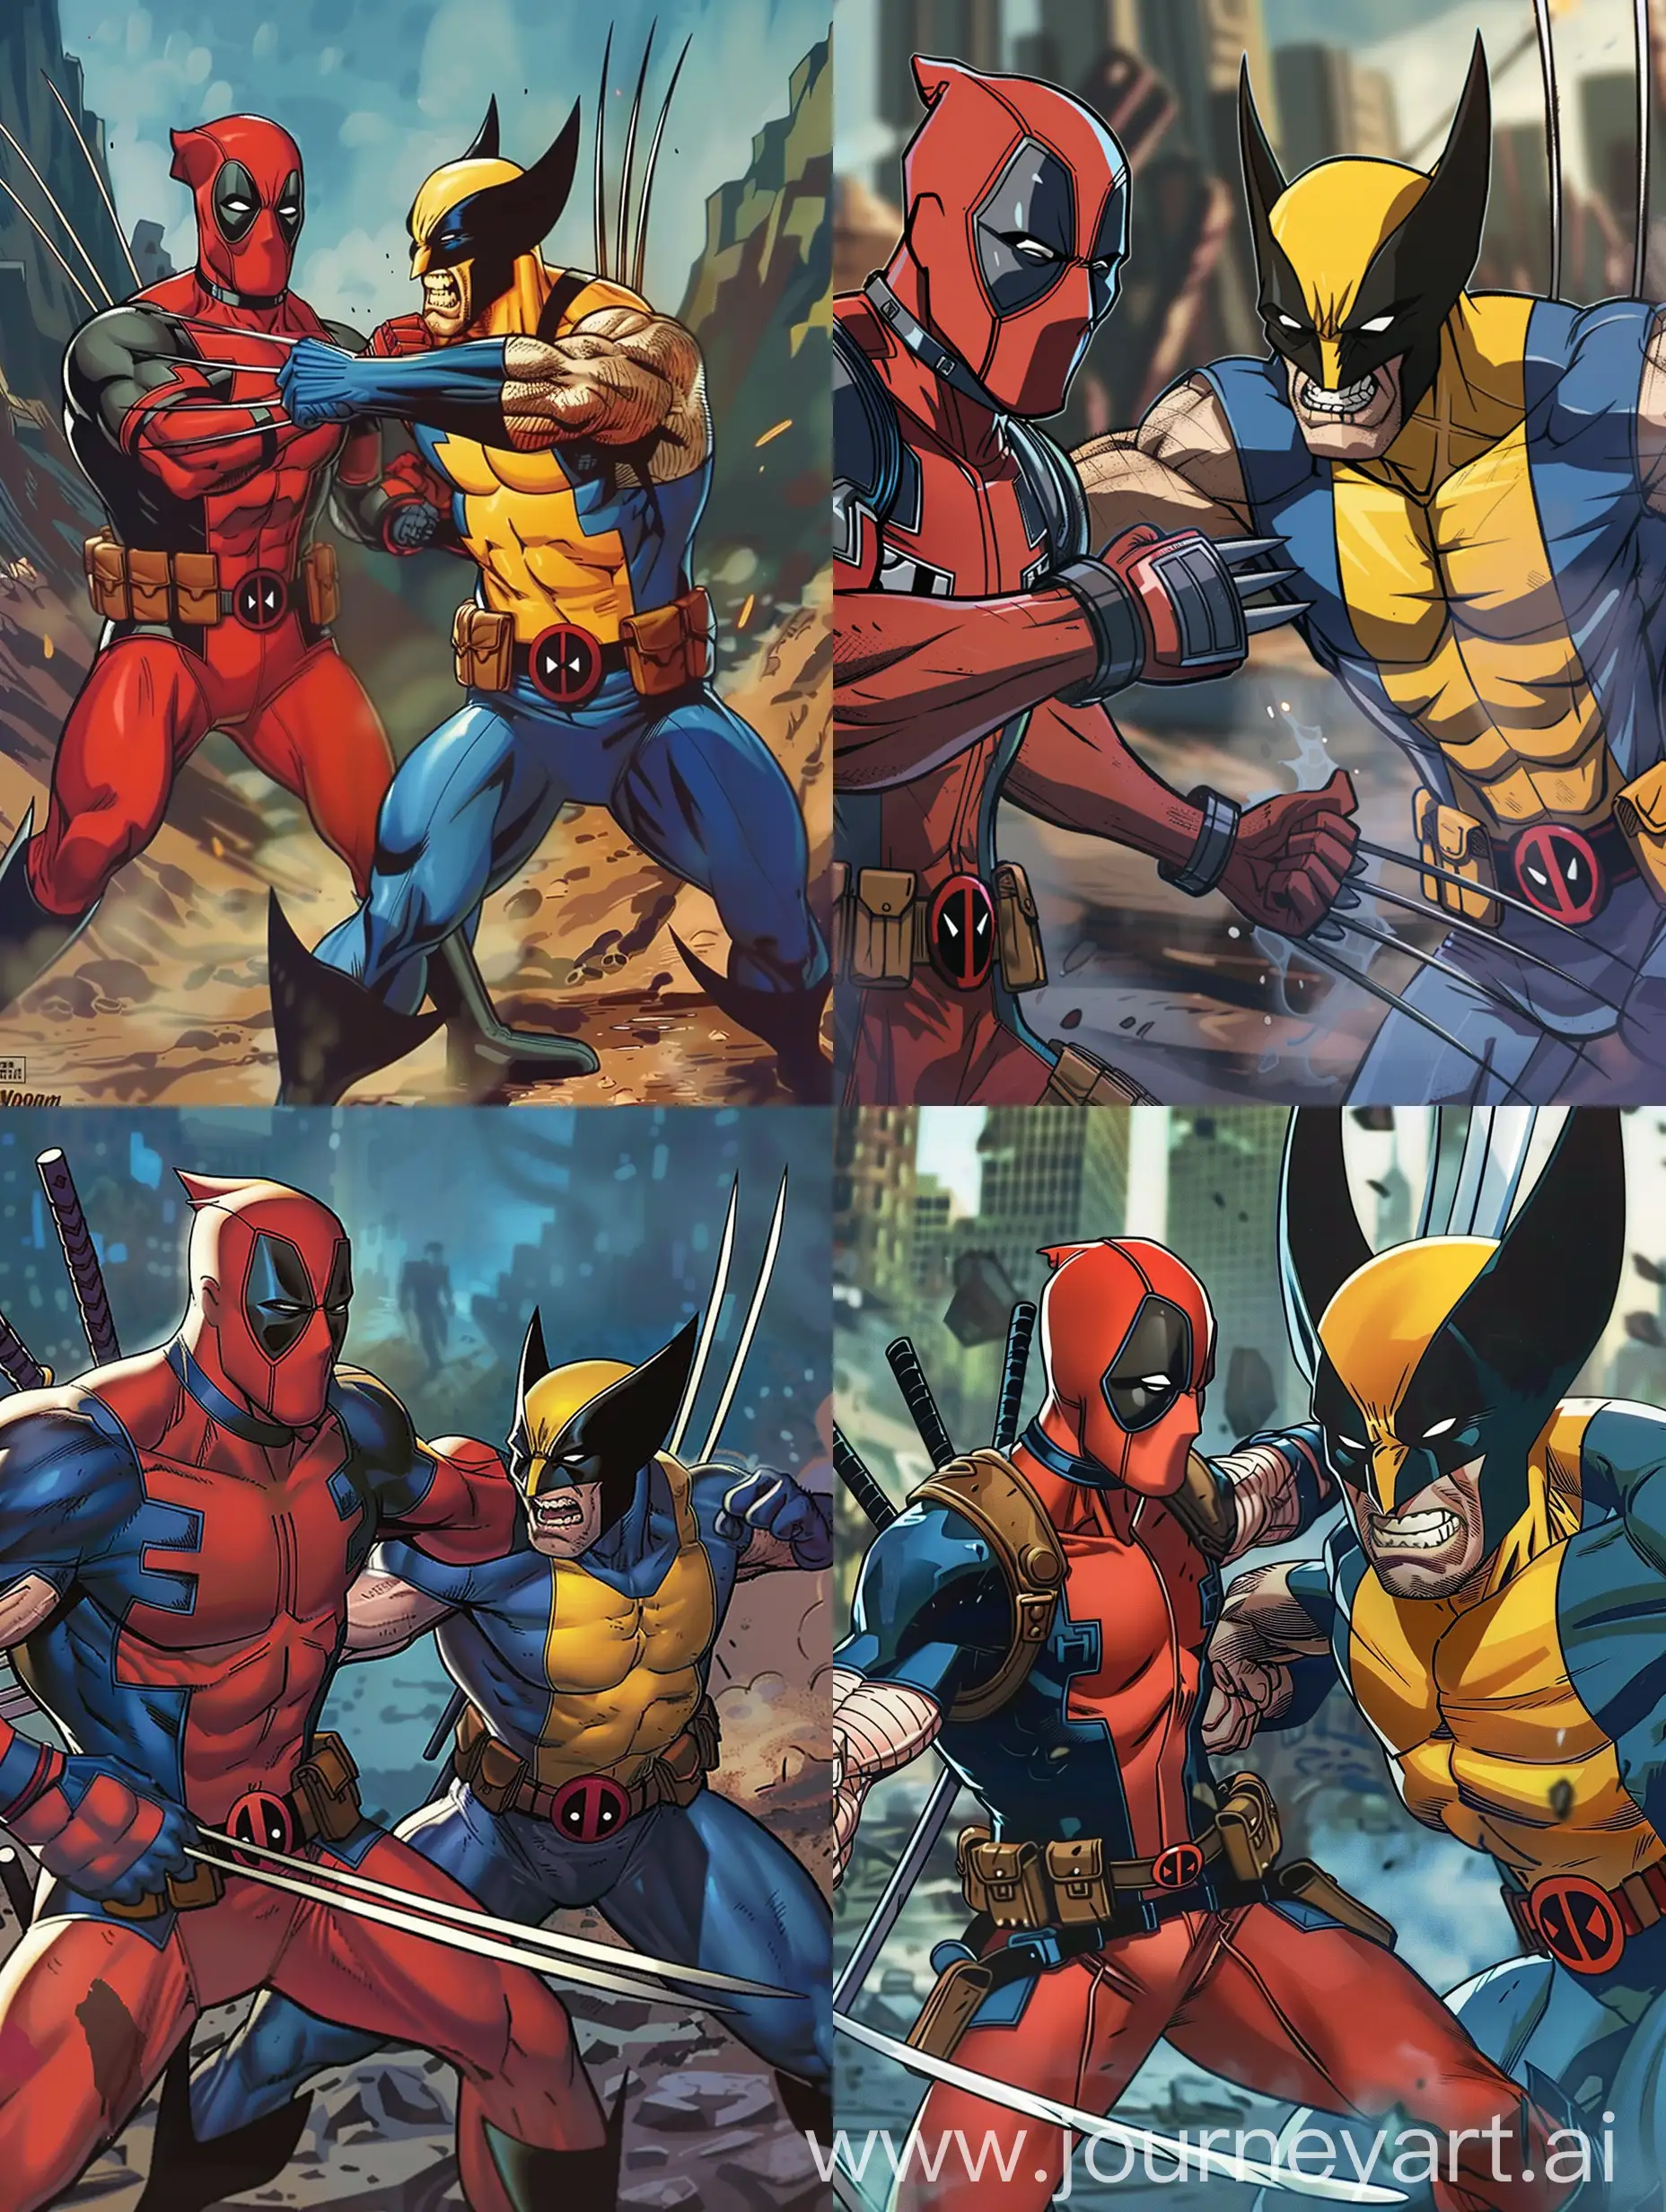 Epic-Battle-Between-Deadpool-and-Wolverine-in-1997-Cartoon-Style